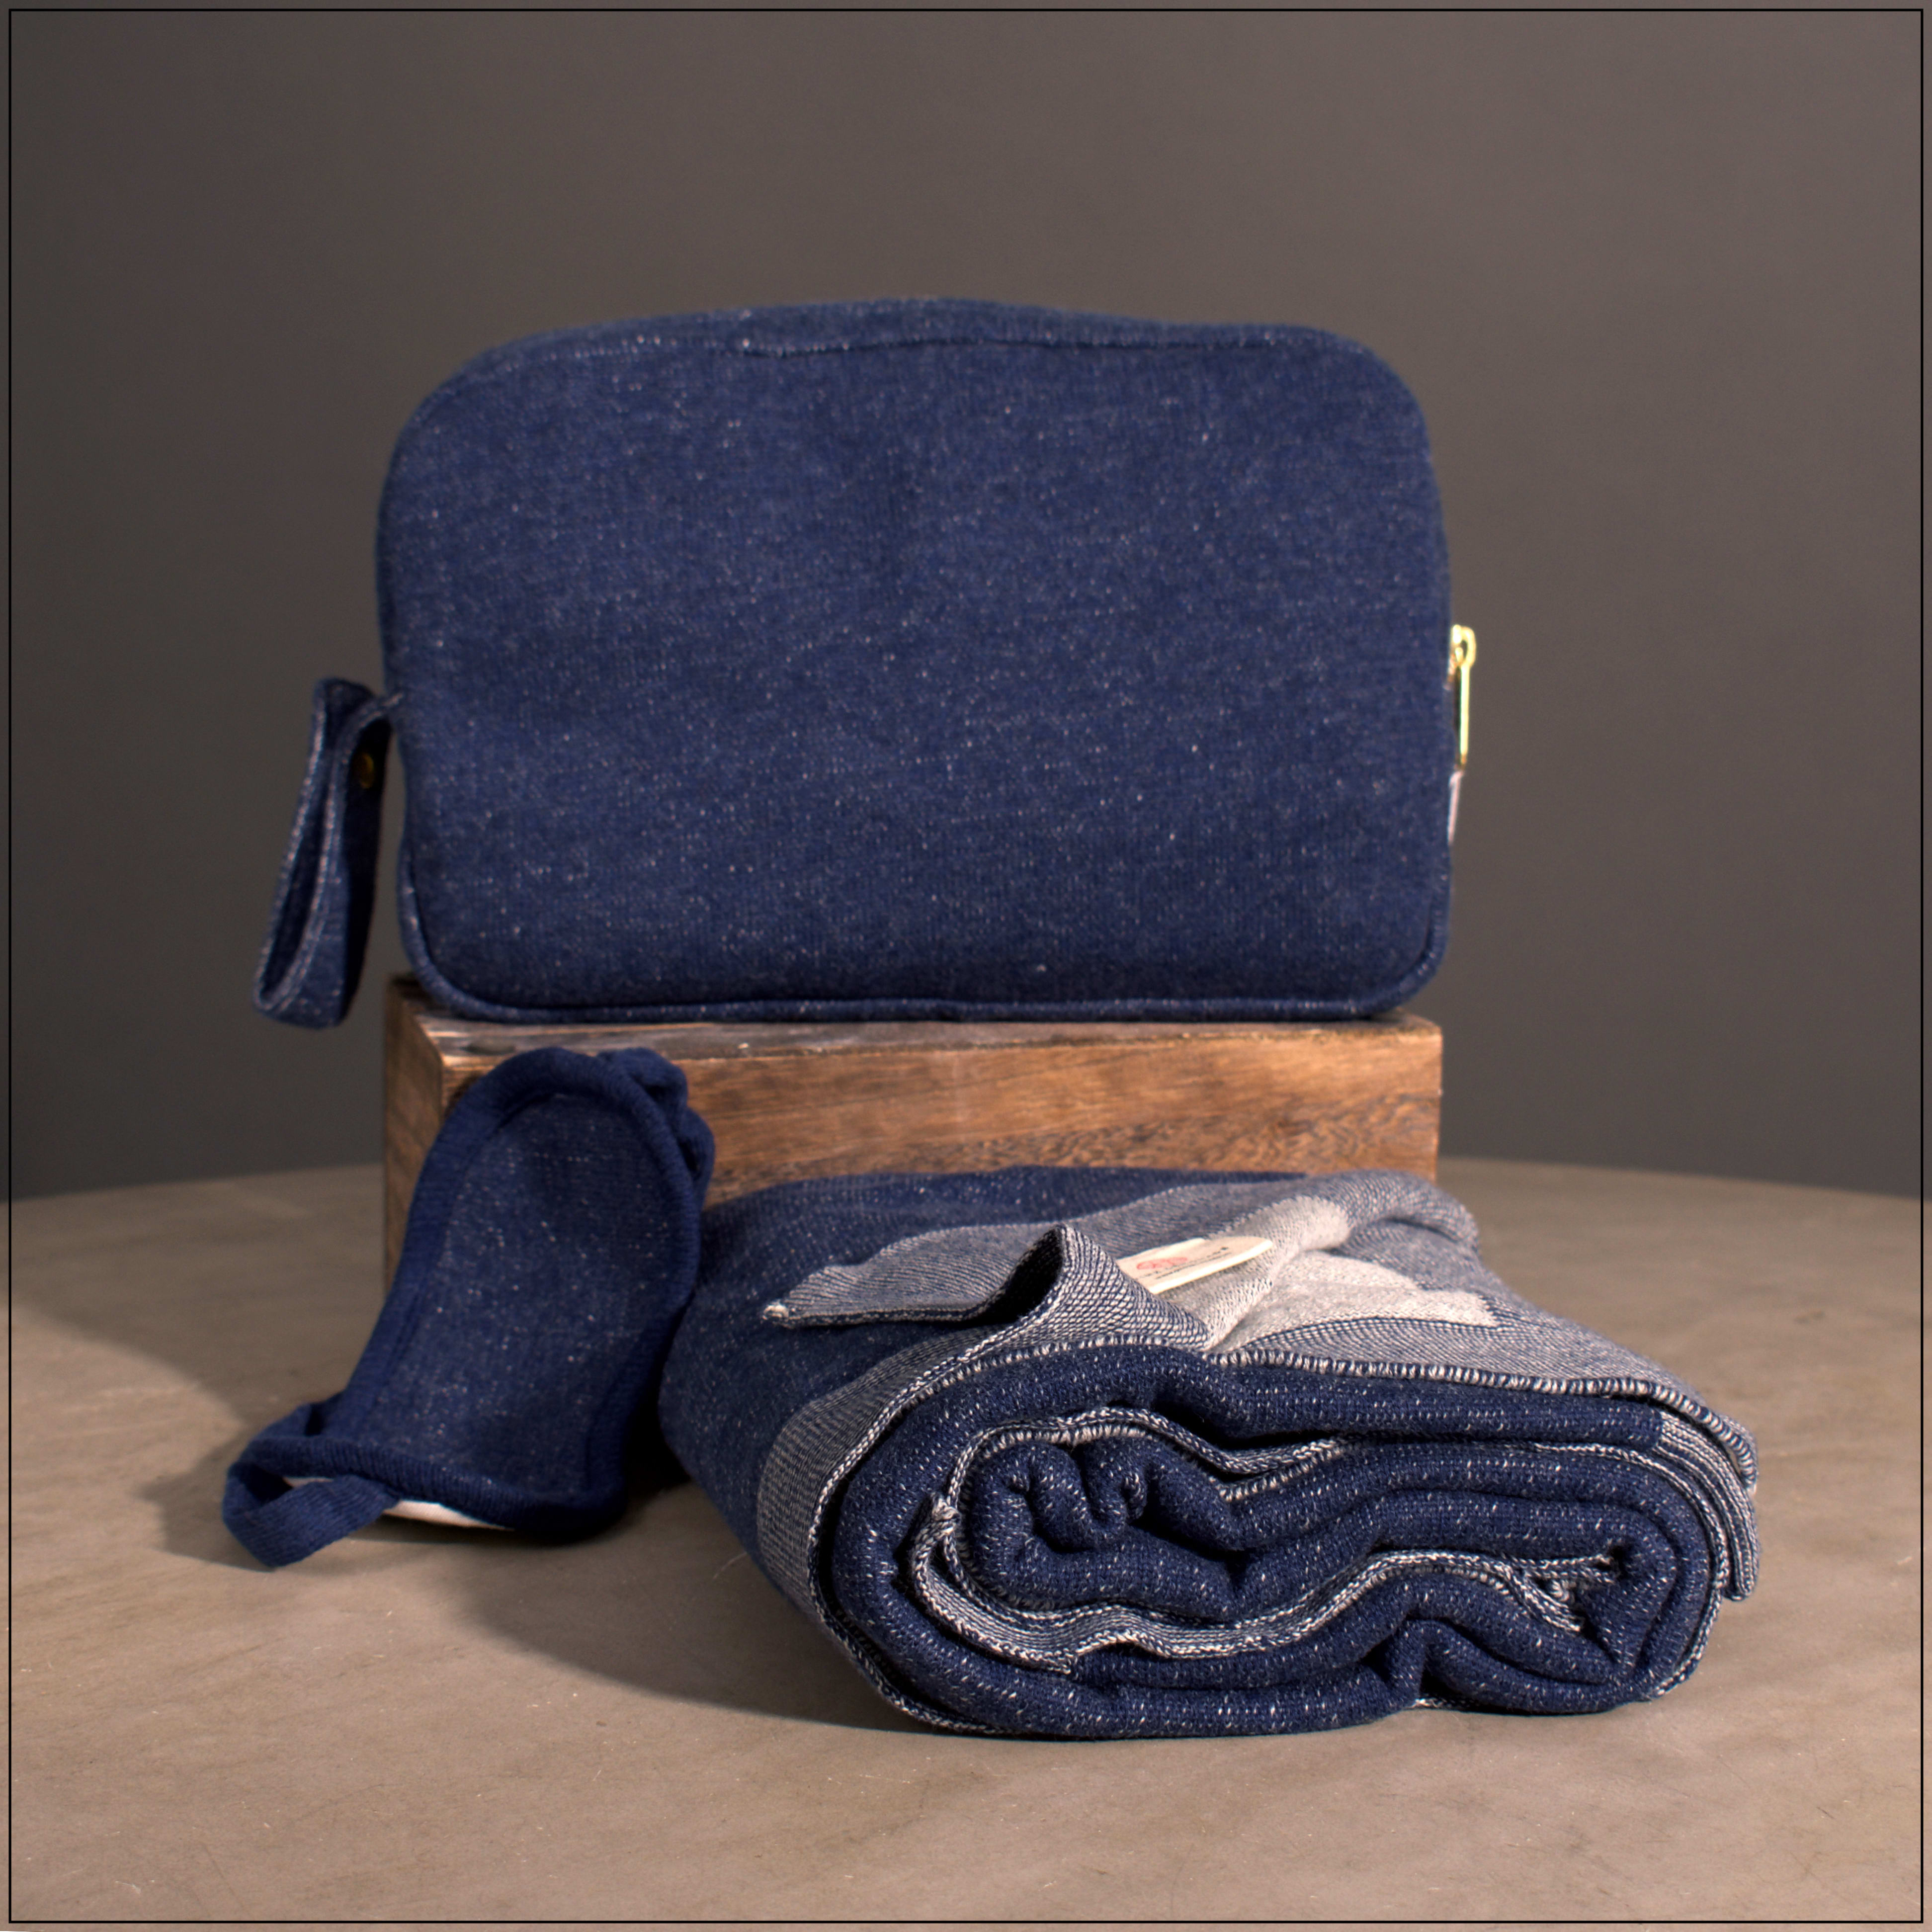 Navy Travel Blanket Set - Pink Lemonade’s 100% Cotton Travel Blanket Set is the perfect accompaniment for your next exploration. 100% pure Cotton blanket feels amazing against your skin and offers extreme softness and warmth. This luxury travel set makes a wonderful gift for a traveler.  Excellent wedding present for newlyweds to take on their honeymoon. These luxury travel accessories can be used anywhere – great for train and car travel and makes a precious and thoughtful present for on the go friends and family. Each set includes an incredibly soft blanket, coordinating eye mask and carrying pouch.  Size 40 inches x 60 inches  Fabric 100% Combed Cotton Azo-free OEKO-TEX Certified MADE IN INDIA